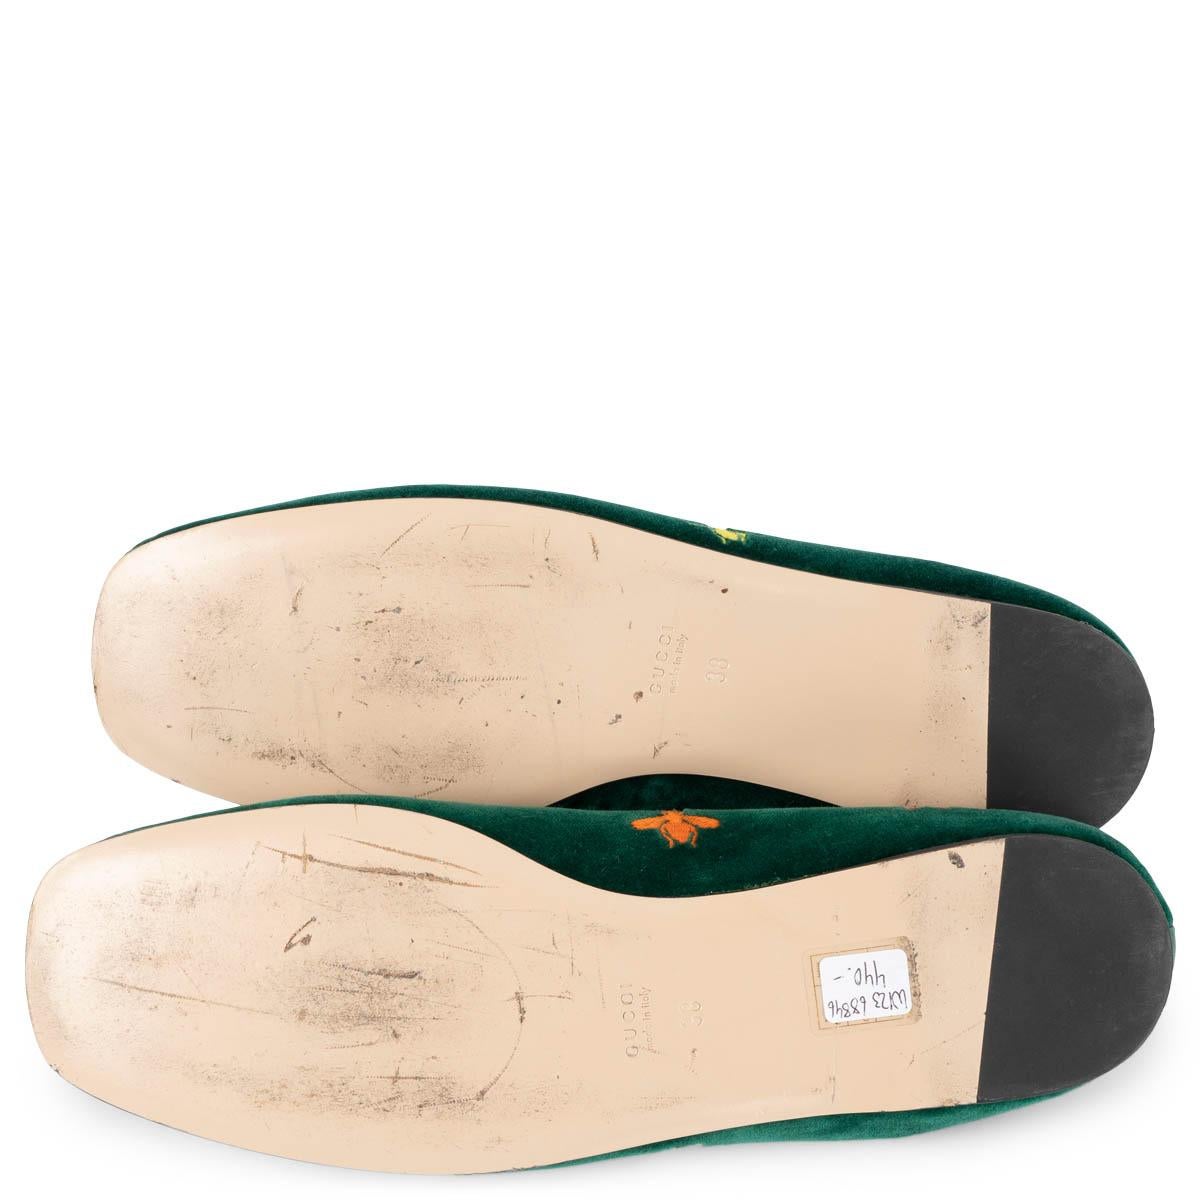 GUCCI green velvet KIBI EMBROIDERED Loafers Shoes 38 3